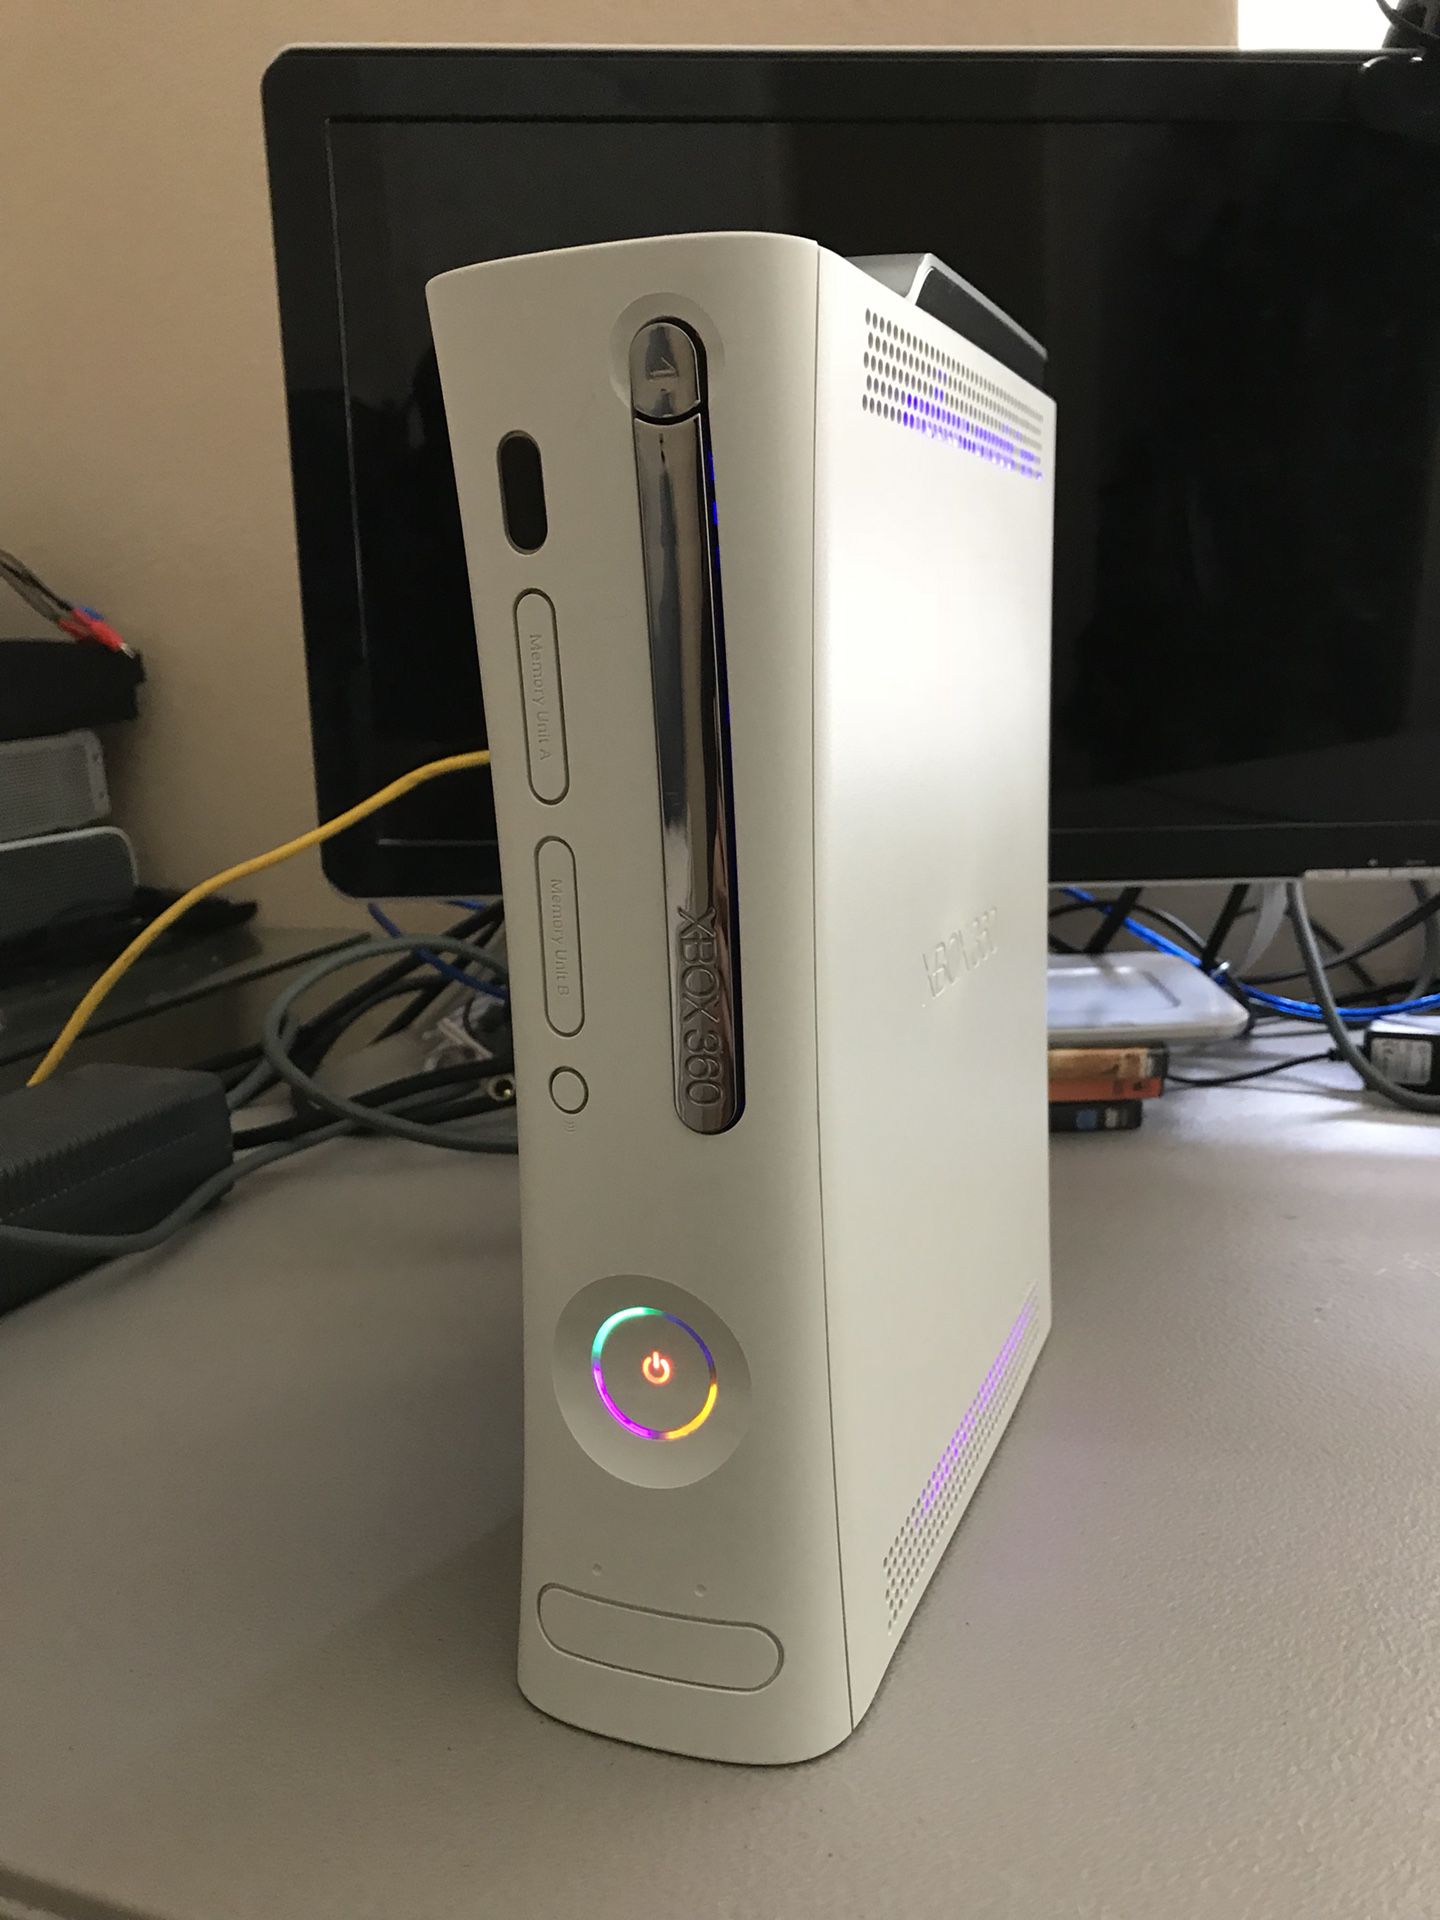 Rgh Jtag Xbox 360 Slim with Mod Menus for Sale in Pearland, TX - OfferUp